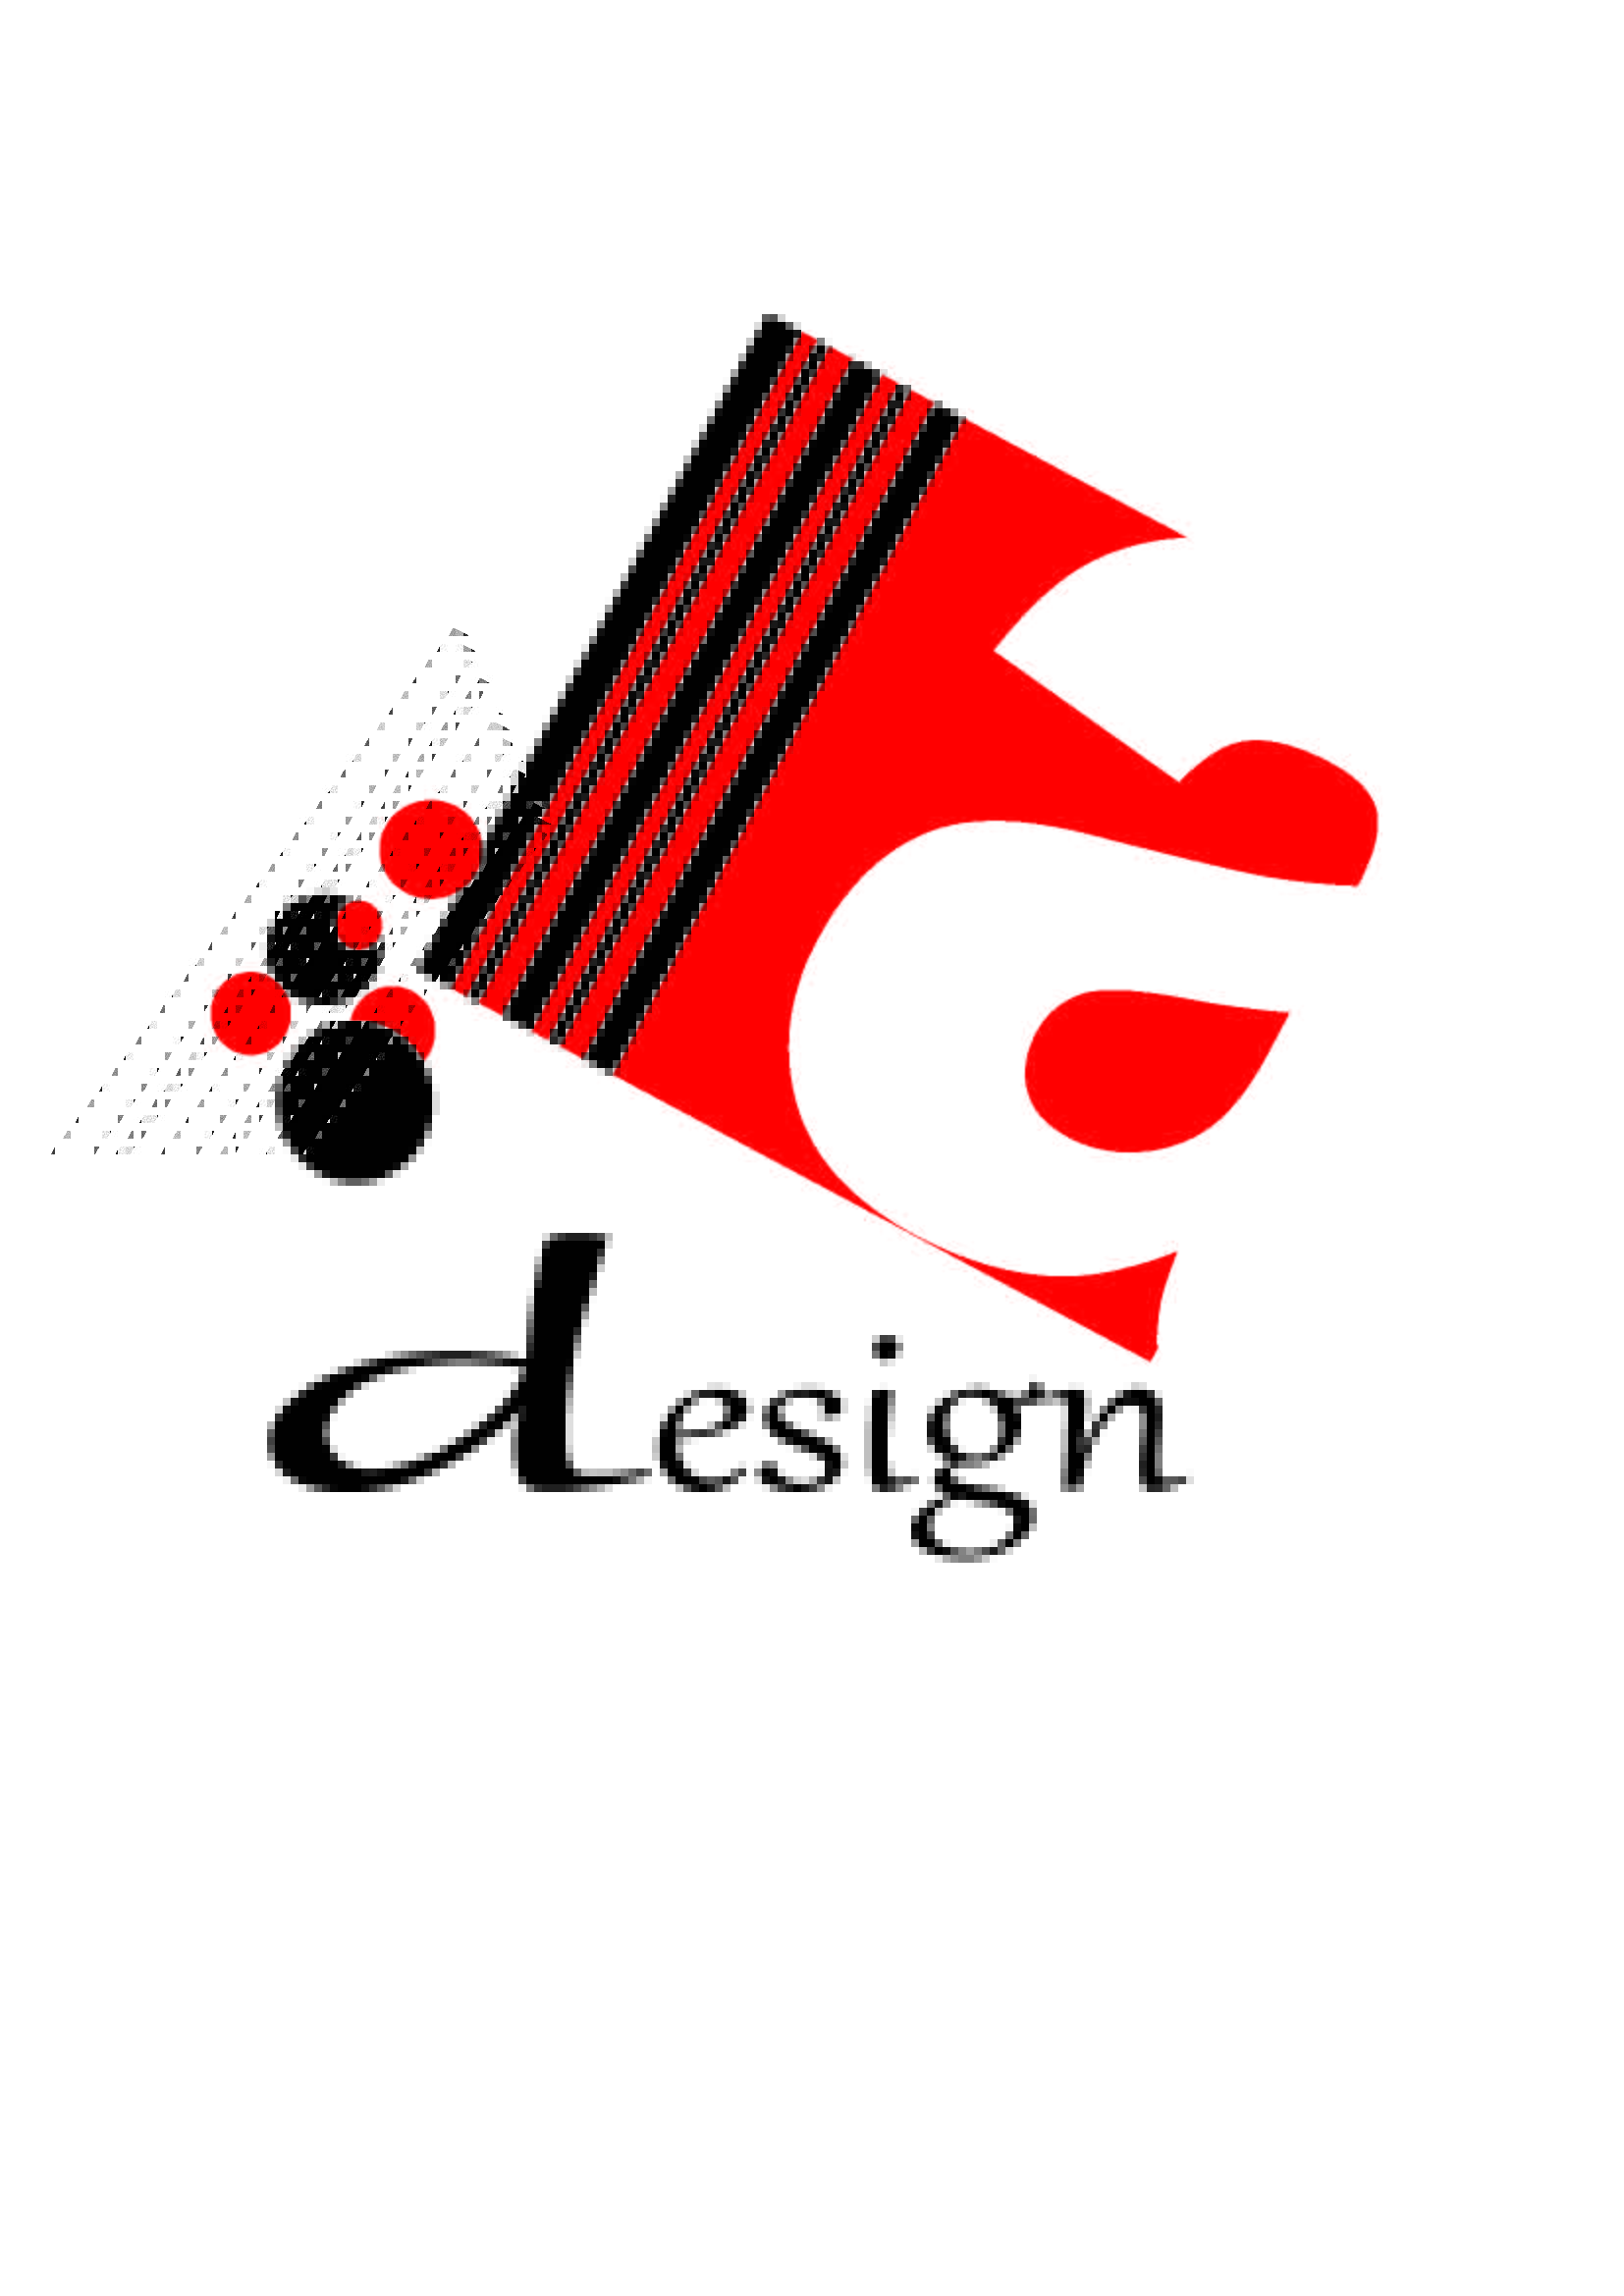 Graphic Company Logo - 17 Company Logos Design Graphic Images Graphic Design, action ...